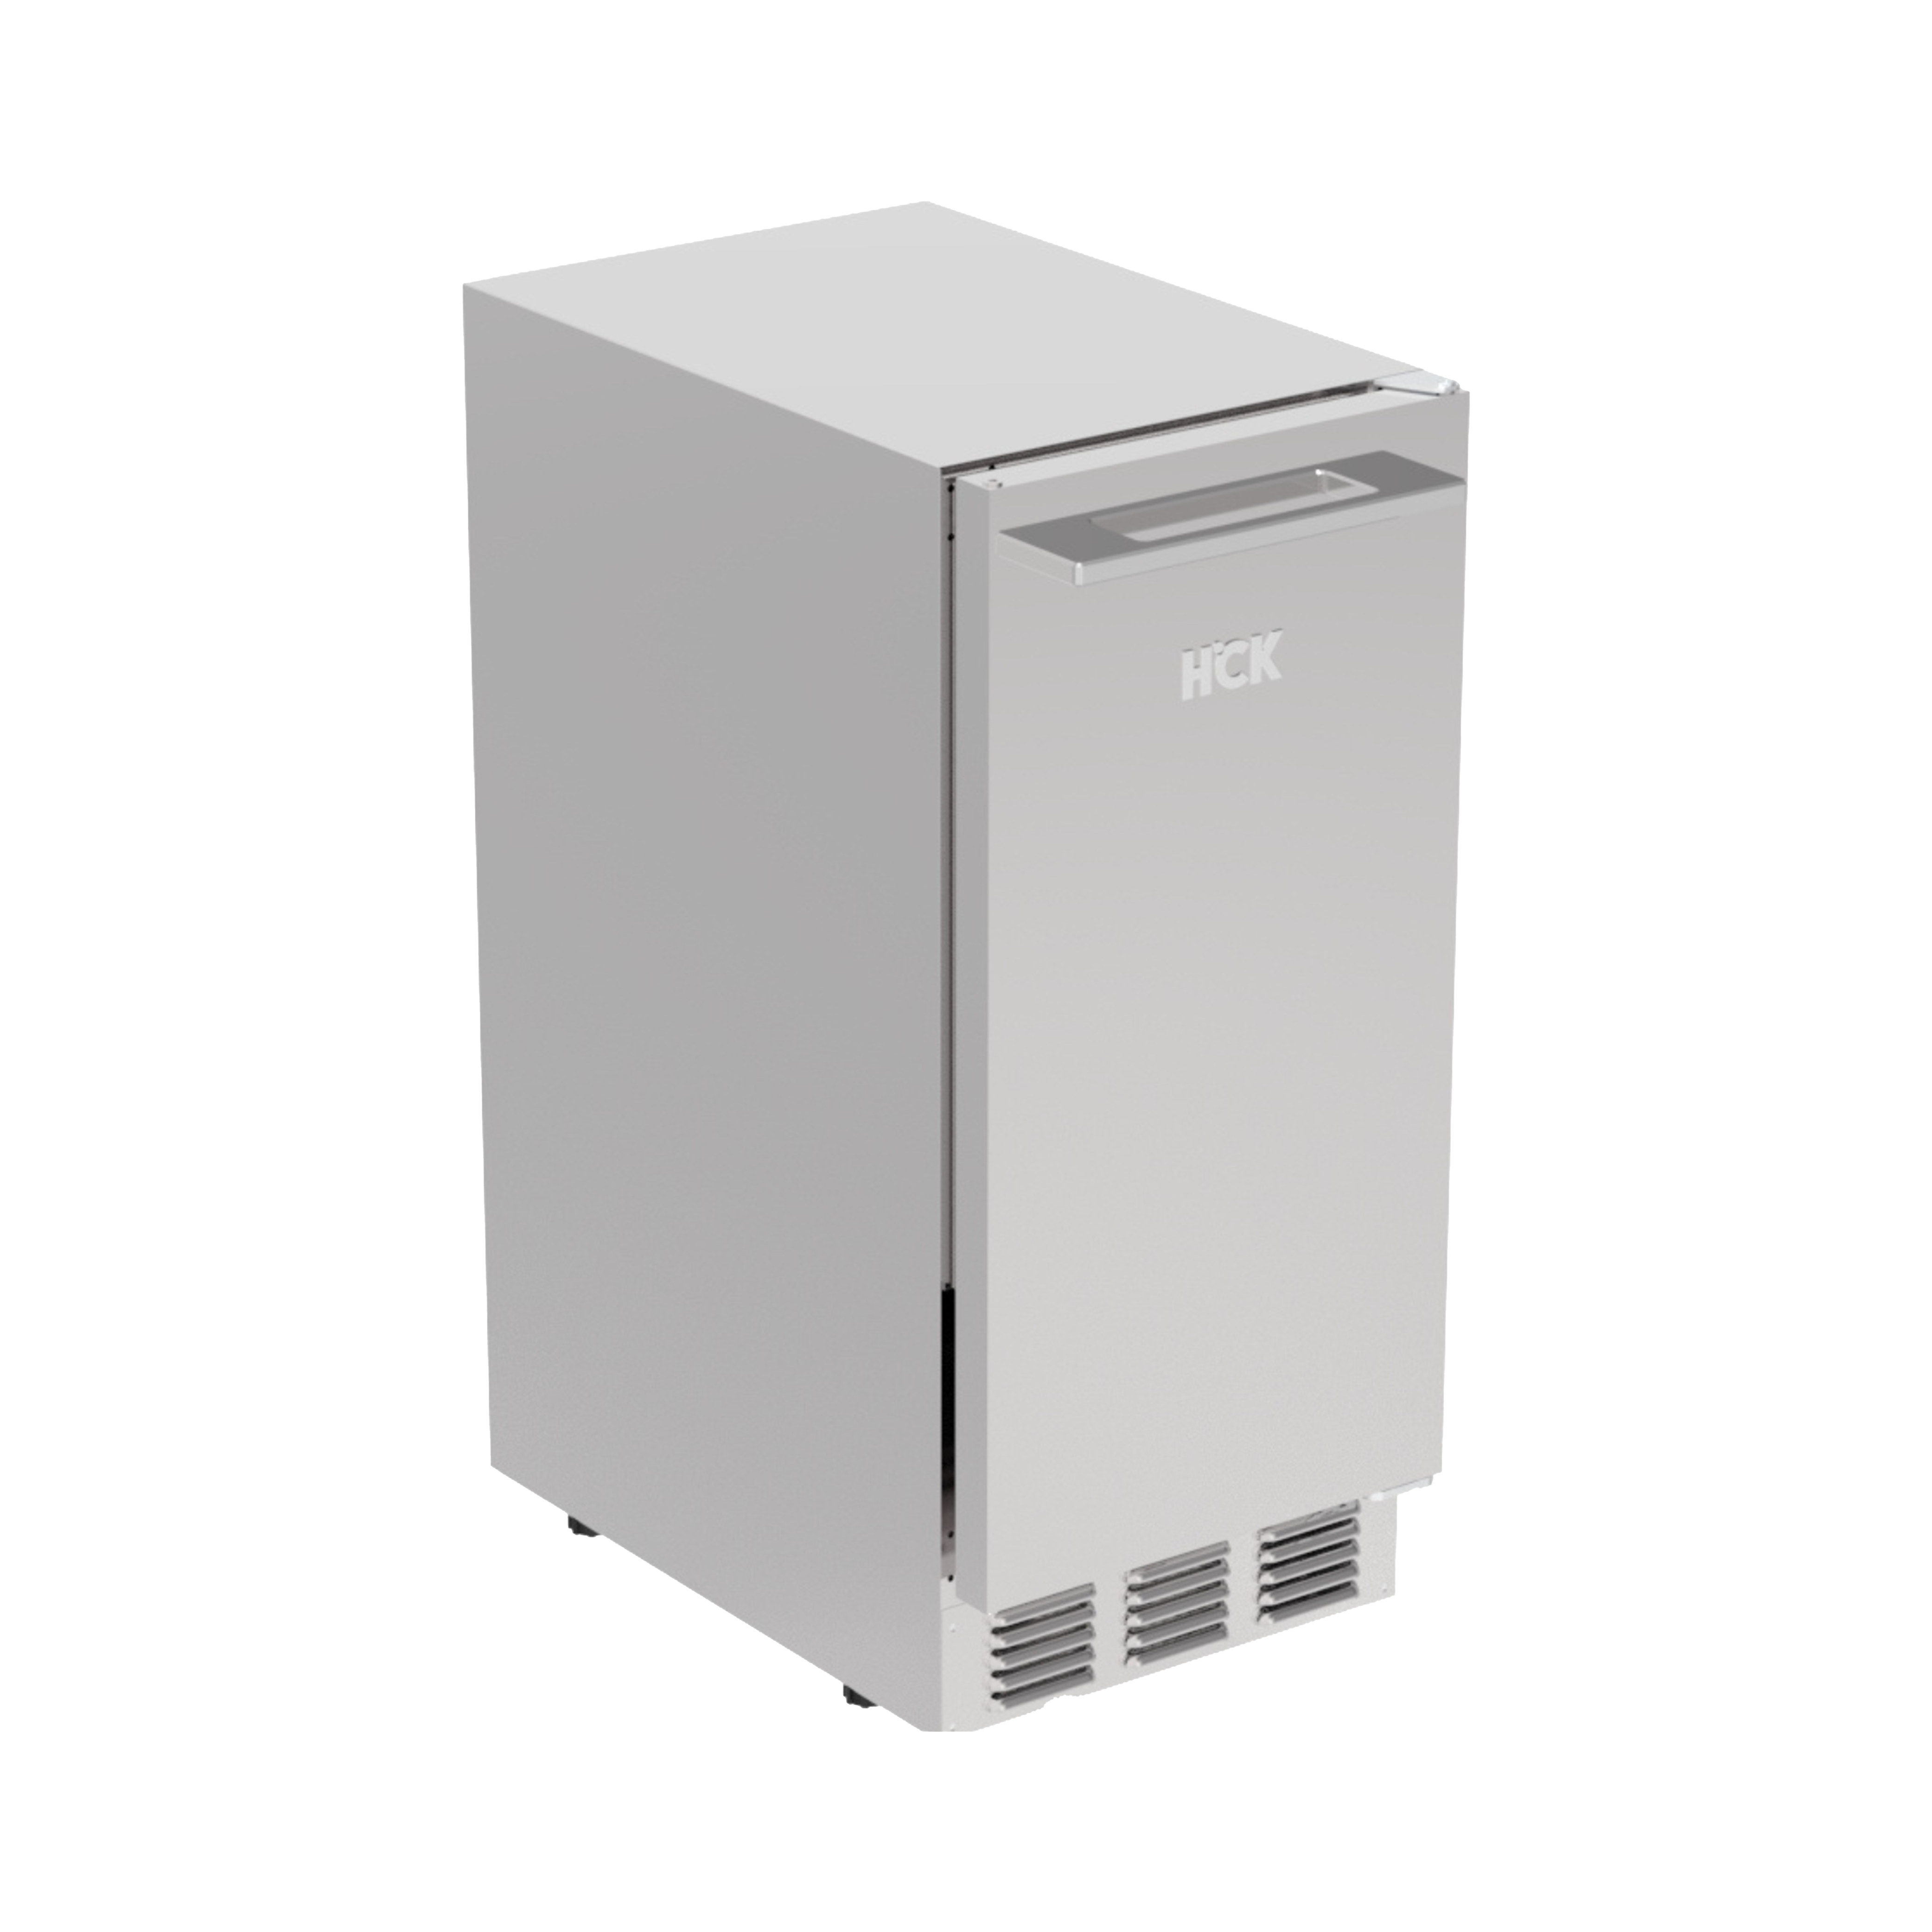 Side view of a 60 lbs Stainless Steel Outdoor Refrigerator Ice Maker